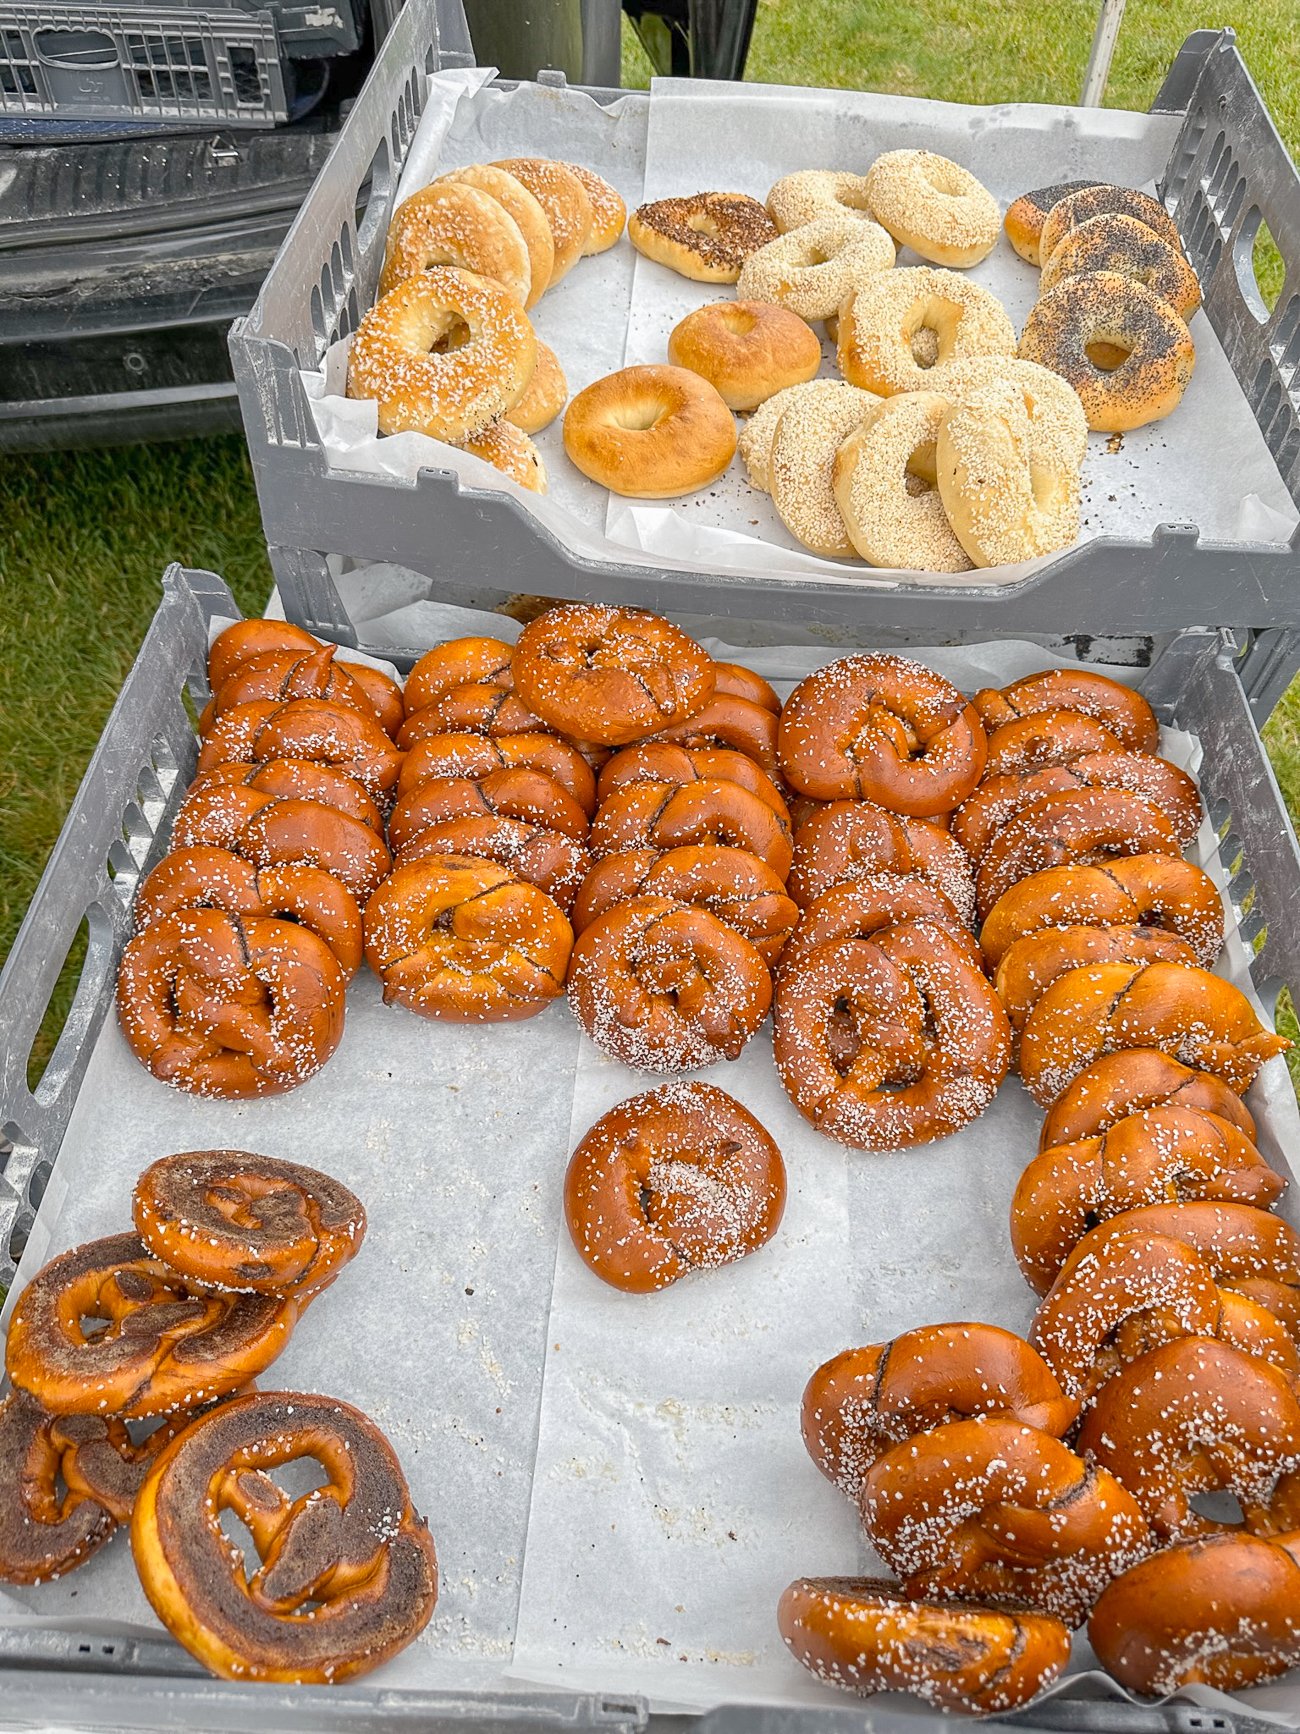 Soft salted pretzels and seedy bagels at the Boothbay Harbor farmer's market